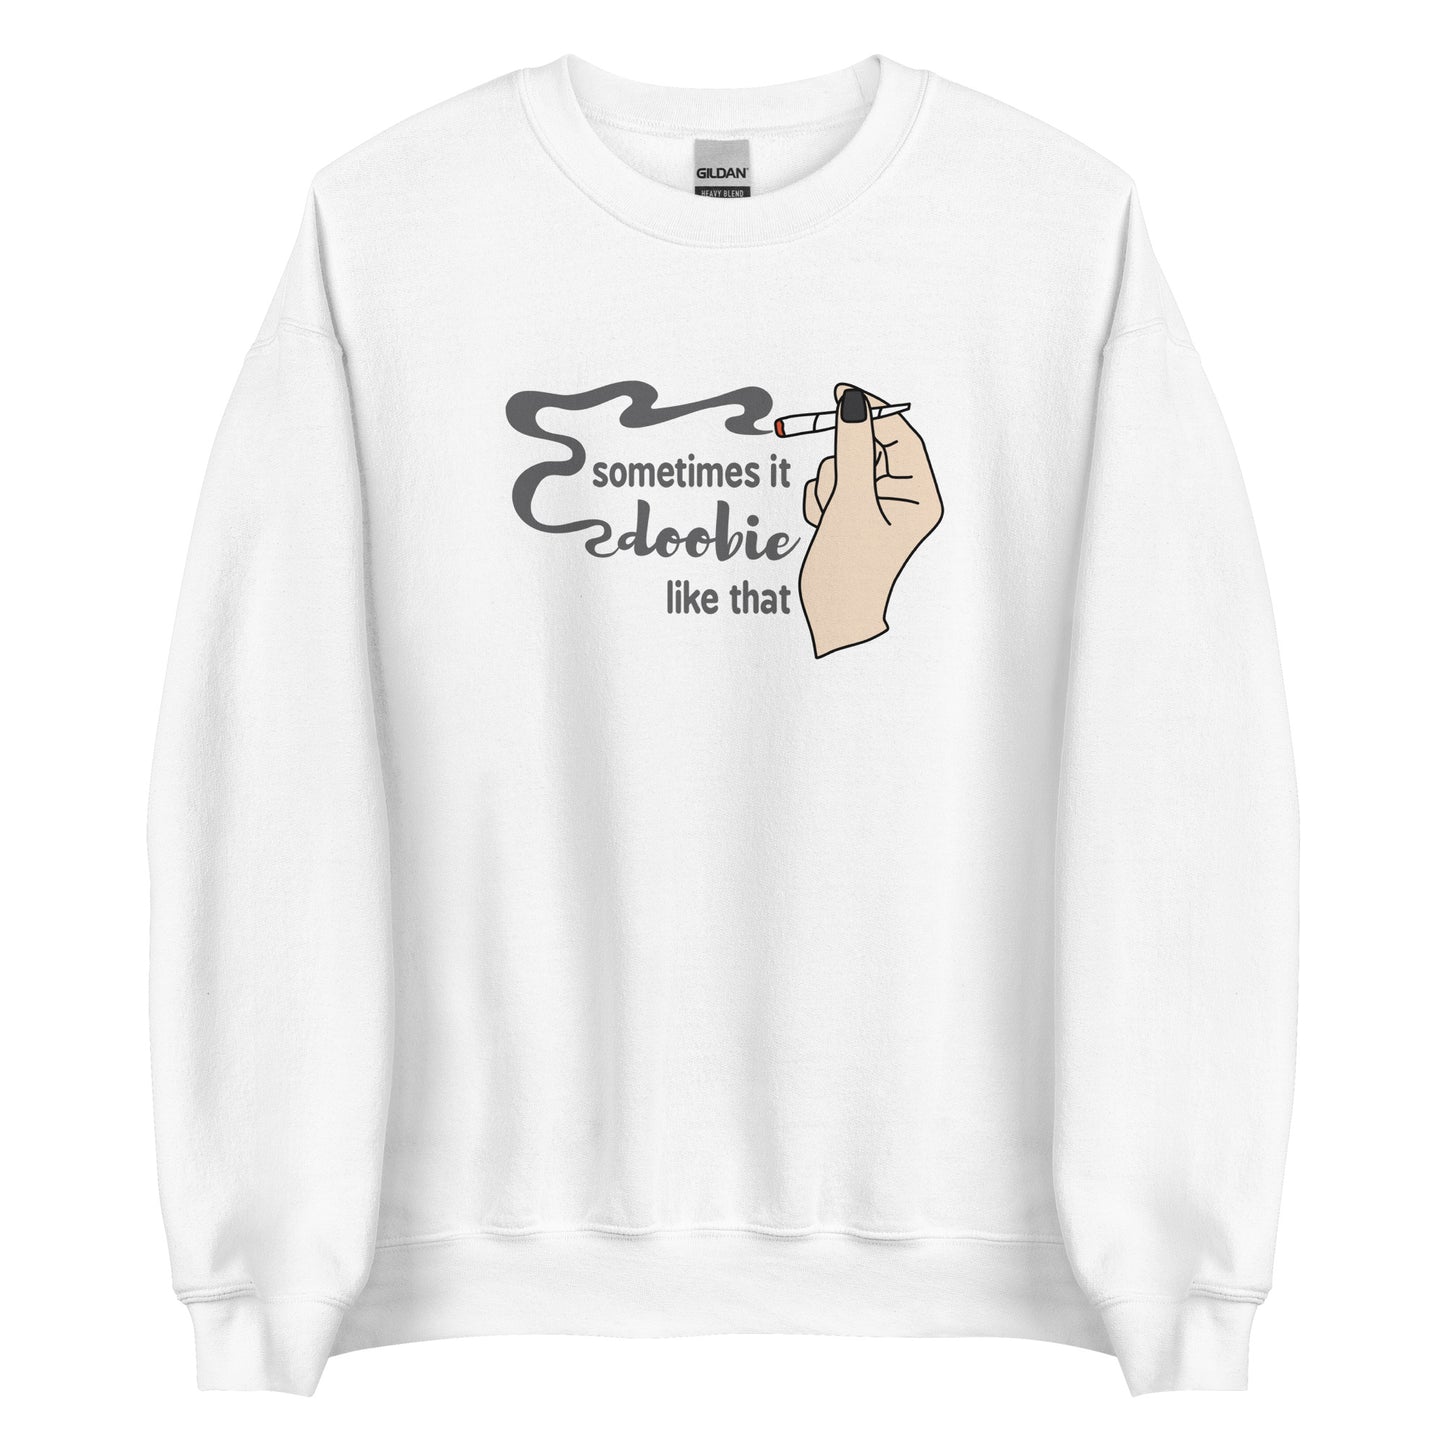 A white crewneck sweatshirt featuring an illustration of a hand holding a smoking joint. Text alongside the hand reads "Sometimes it doobie like that" with the word "doobie" made of smoke from the joint.